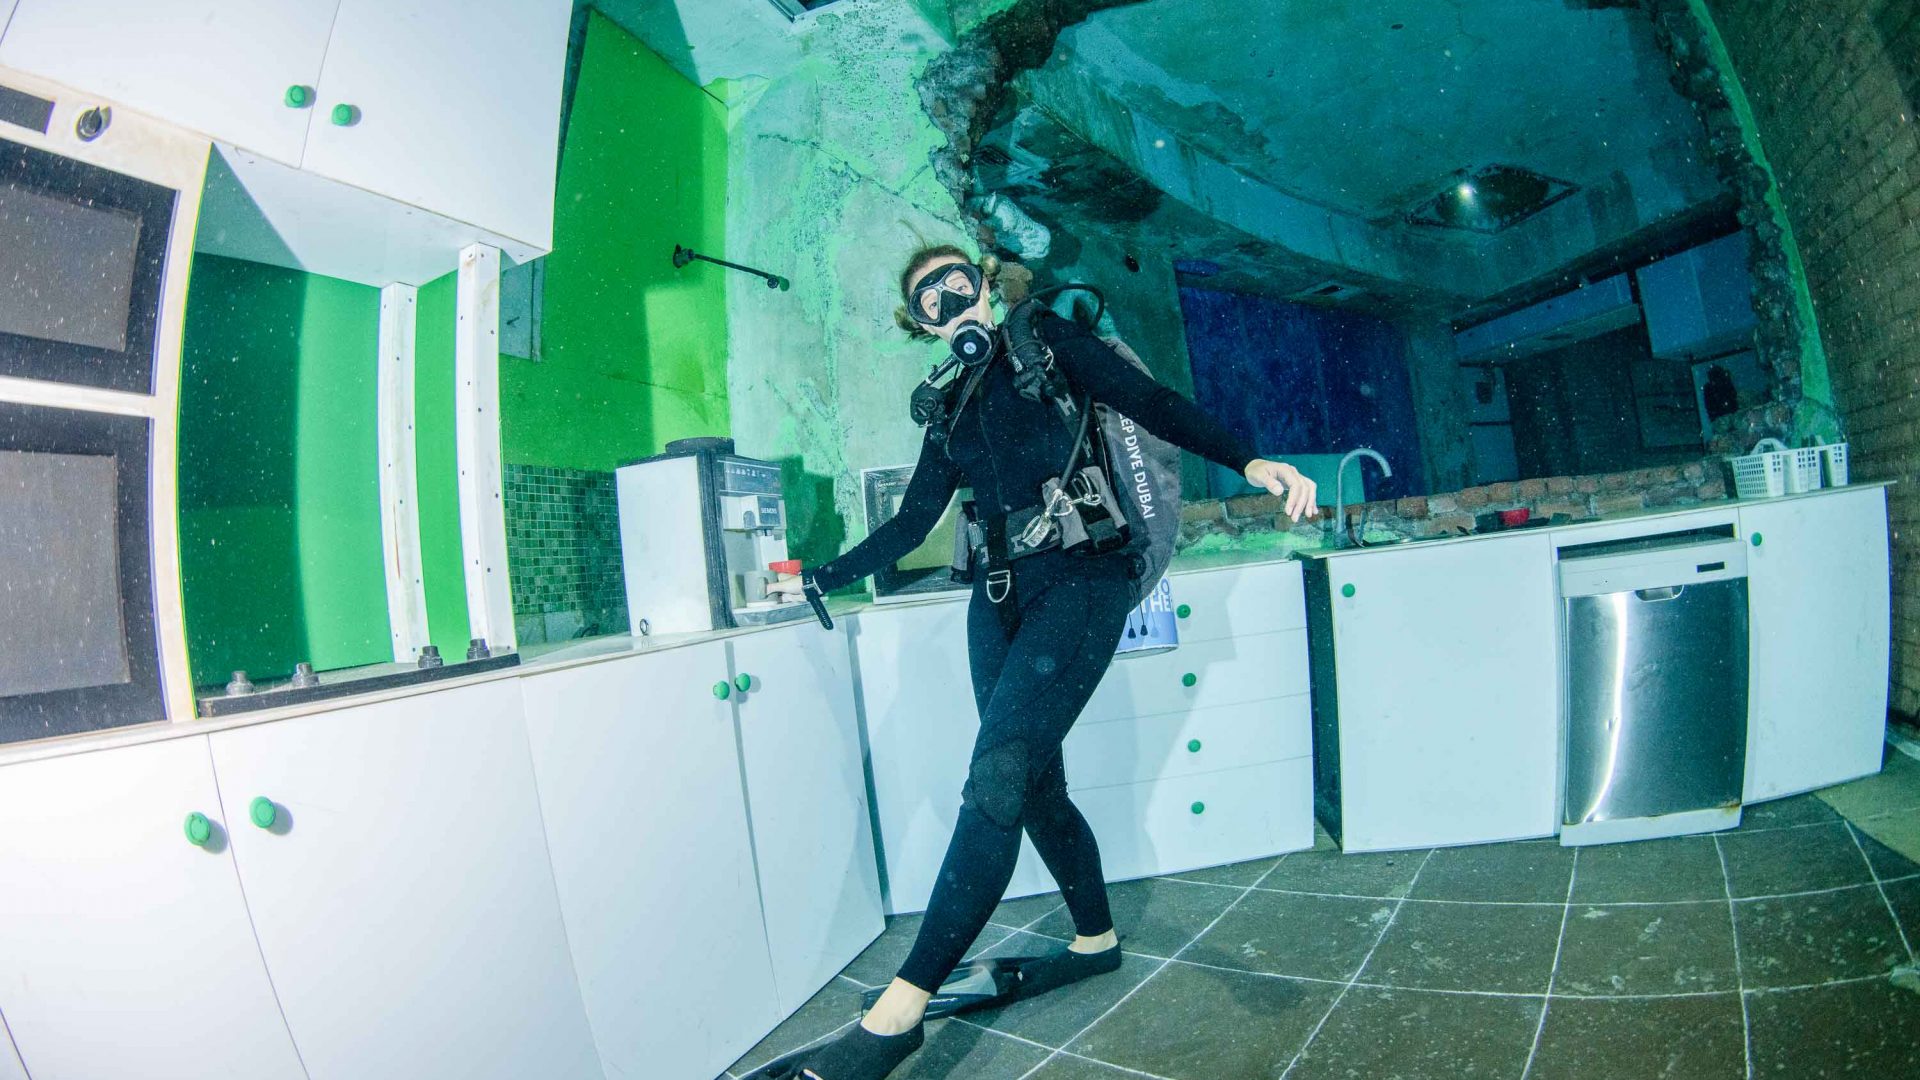 A diver leans against some cabinets in an underwater kitchen.